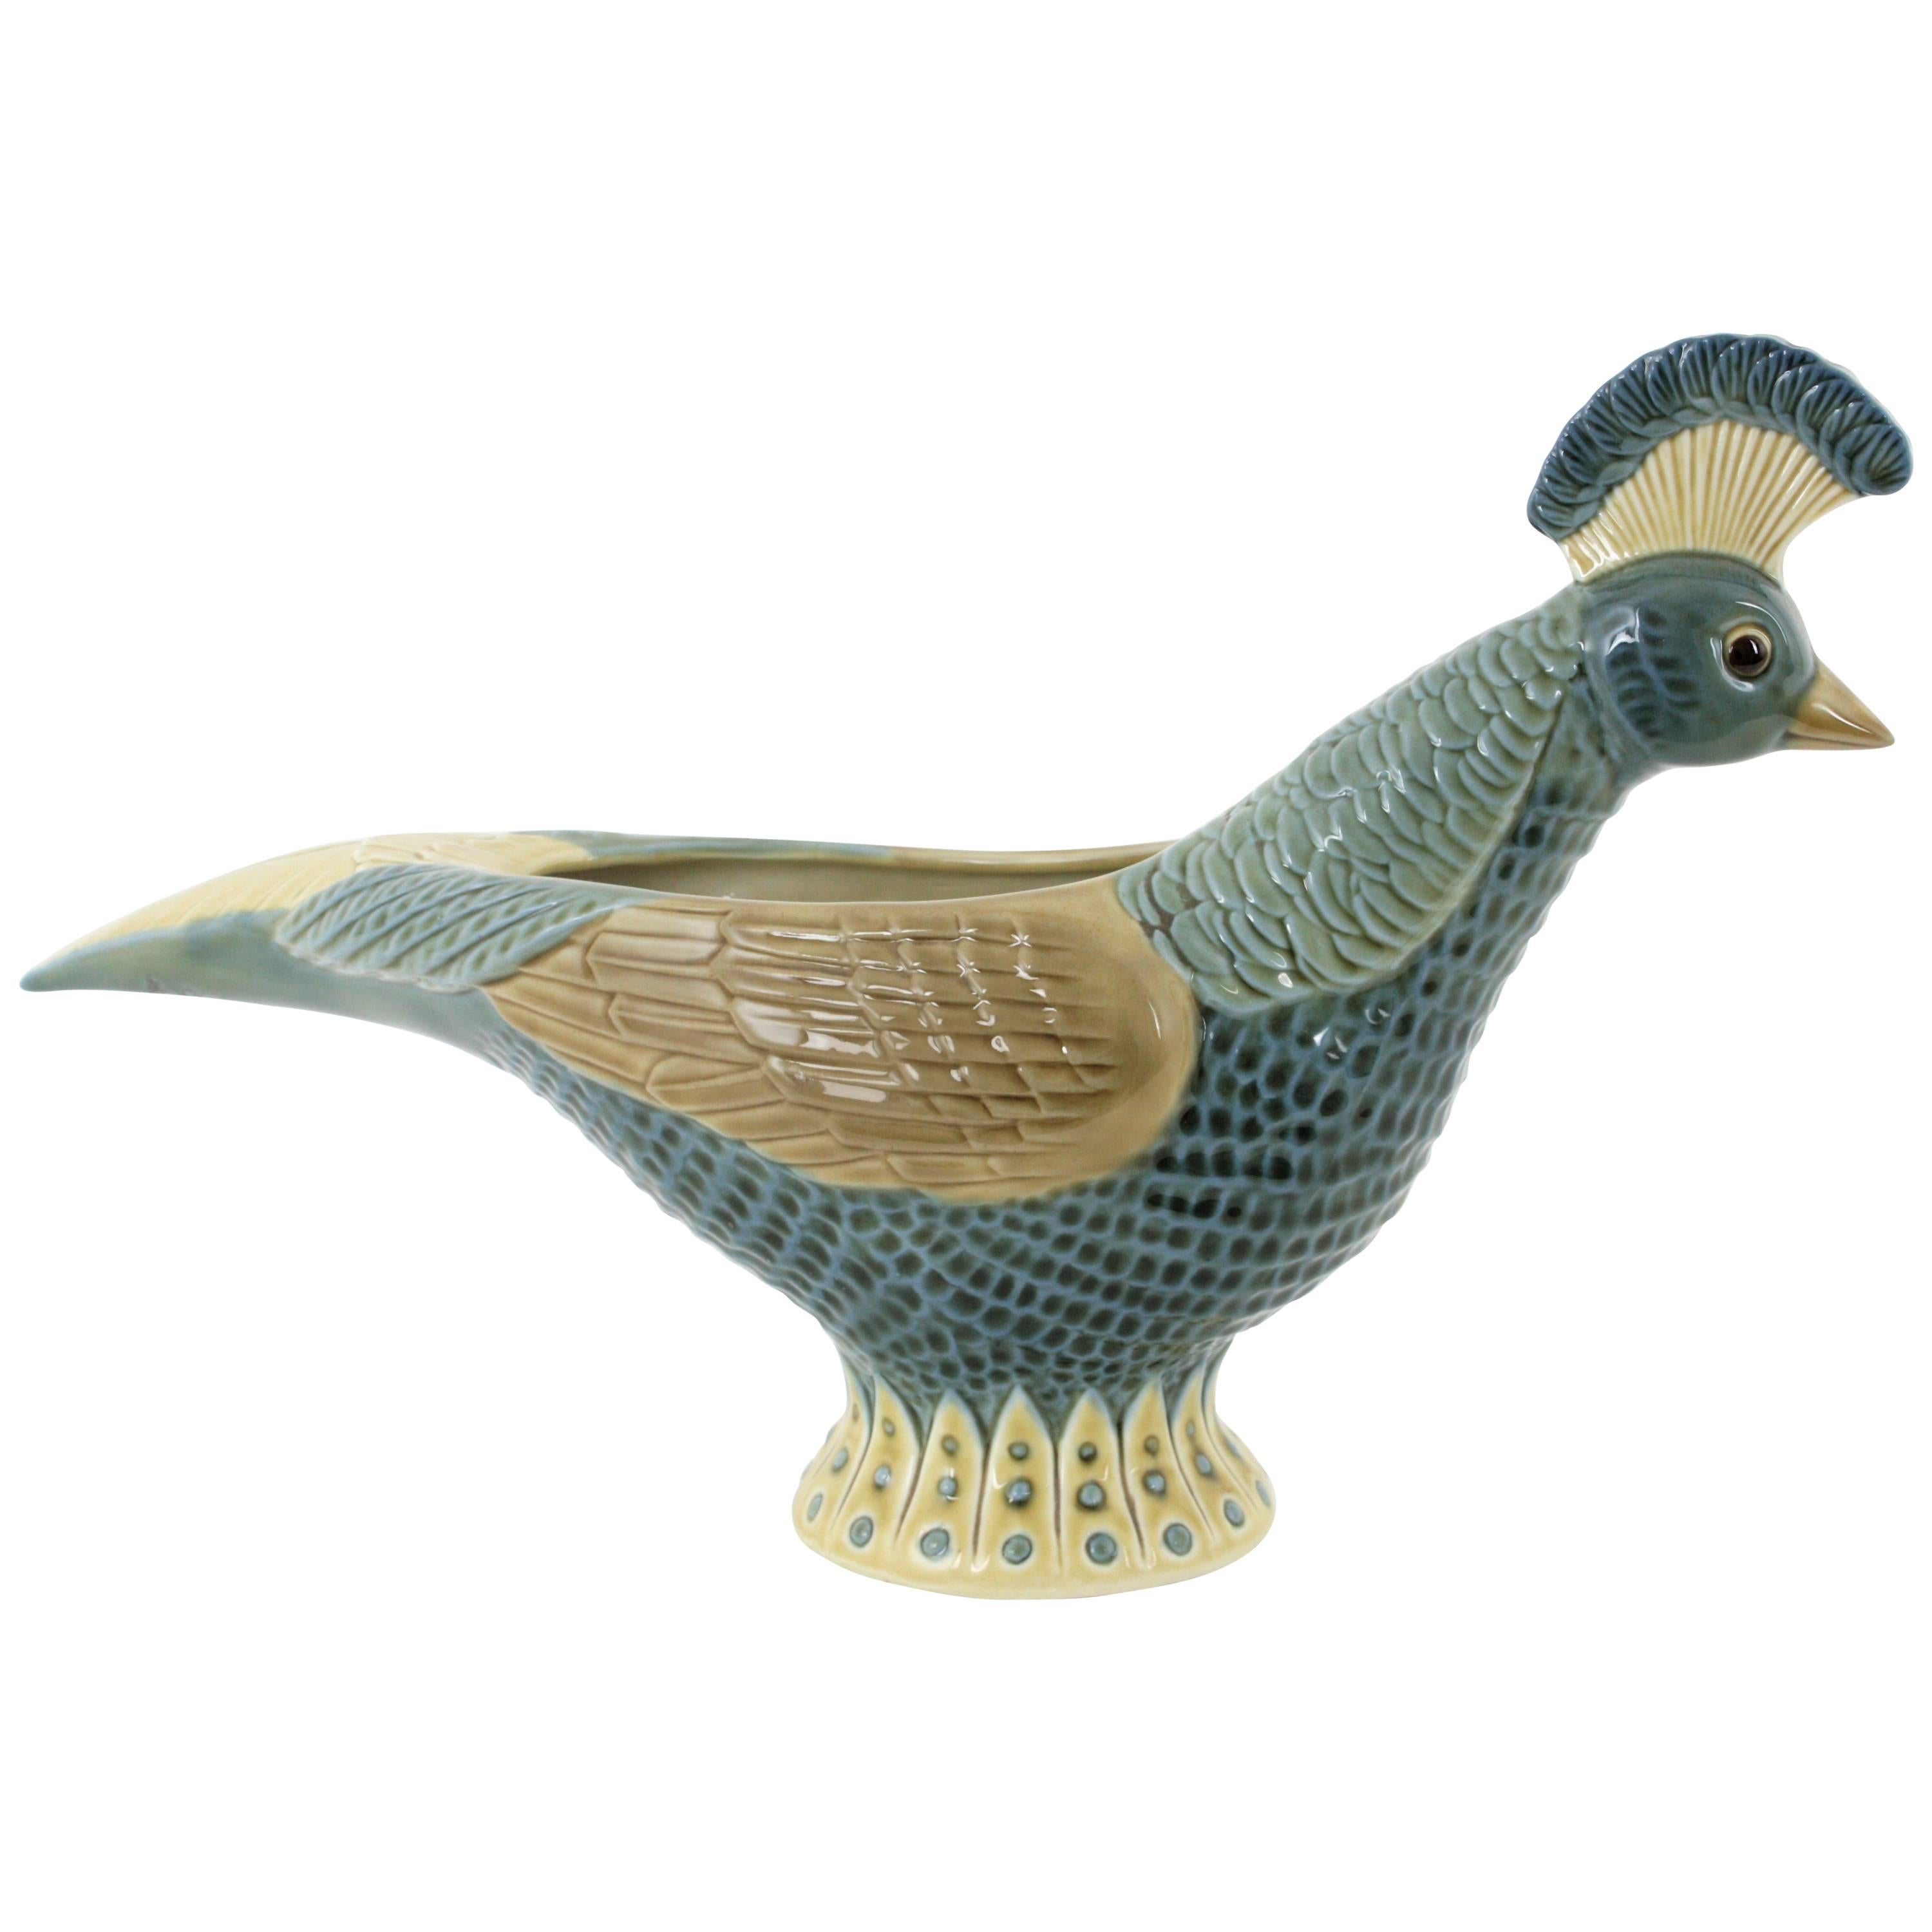 Lladró porcelain pheasant centerpiece / planter by Vicente Martinez.
Beautiful porcelain pheasant figurine centerpiece or planter in blue, cobalt blue, taupe and beige colors designed by Vicente Martinez and manufactured by Lladro,
Spain,